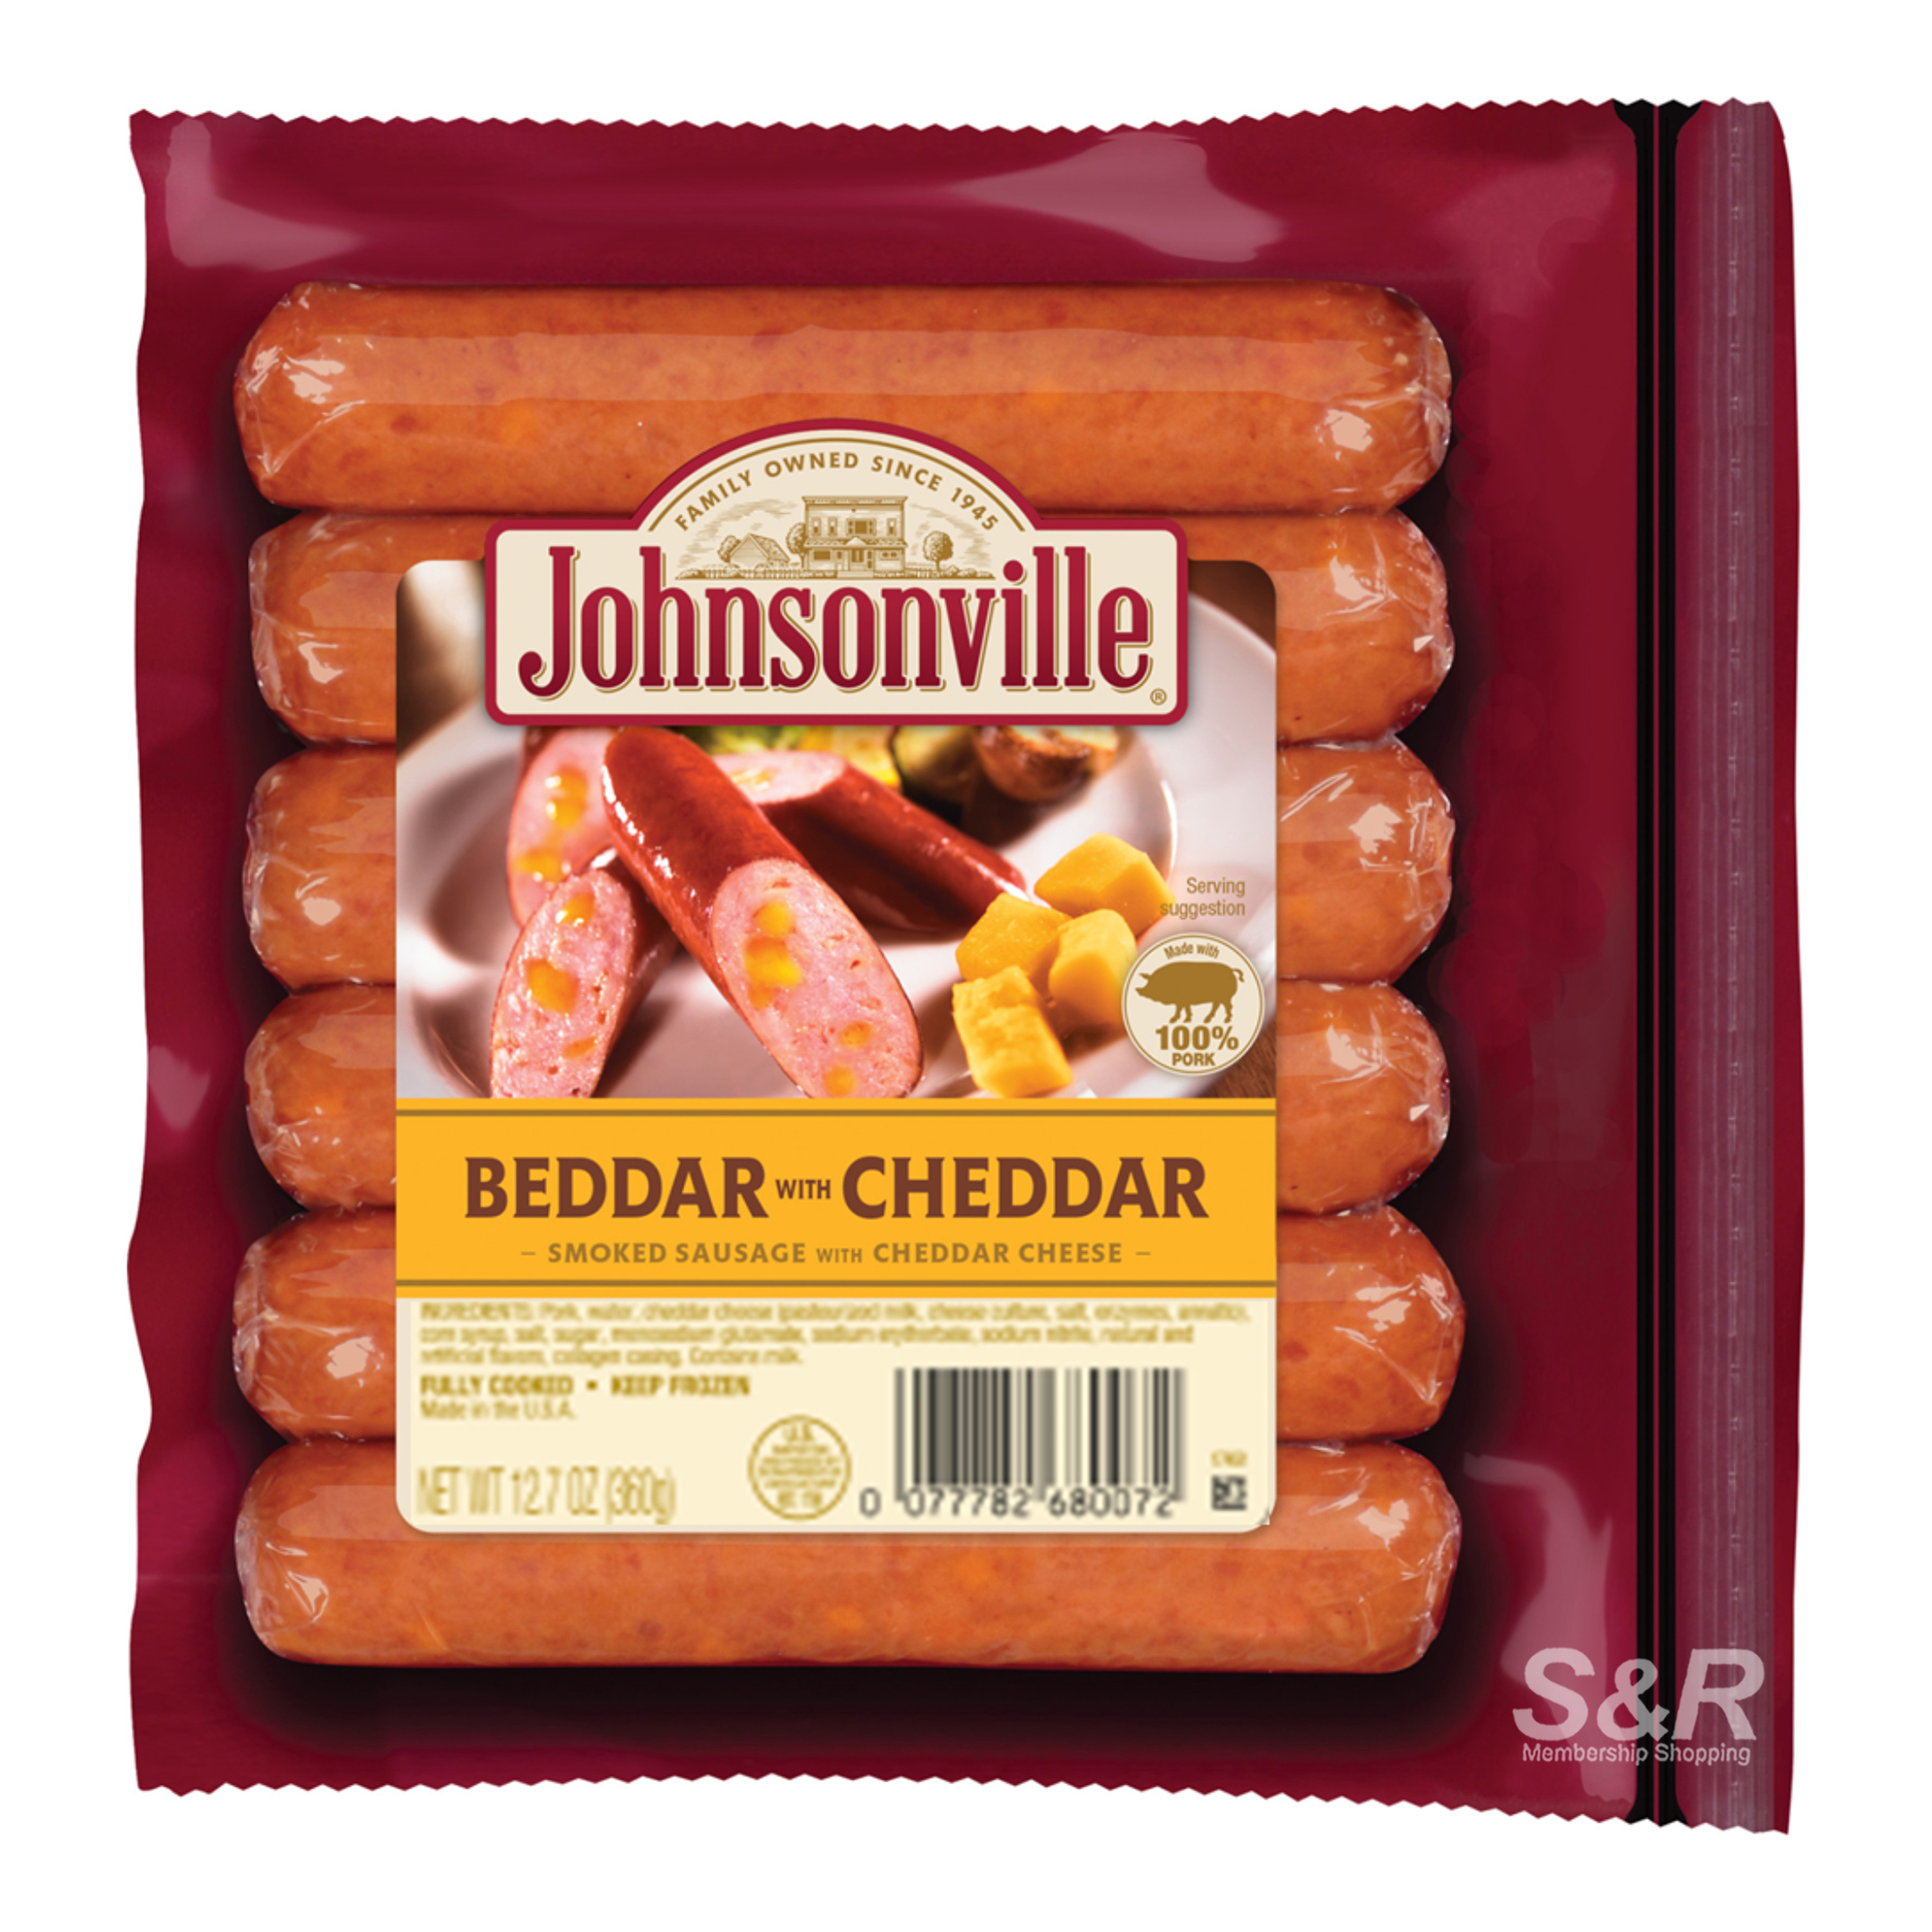 Johnsonville Beddar with Cheddar Smoked Sausage 360g